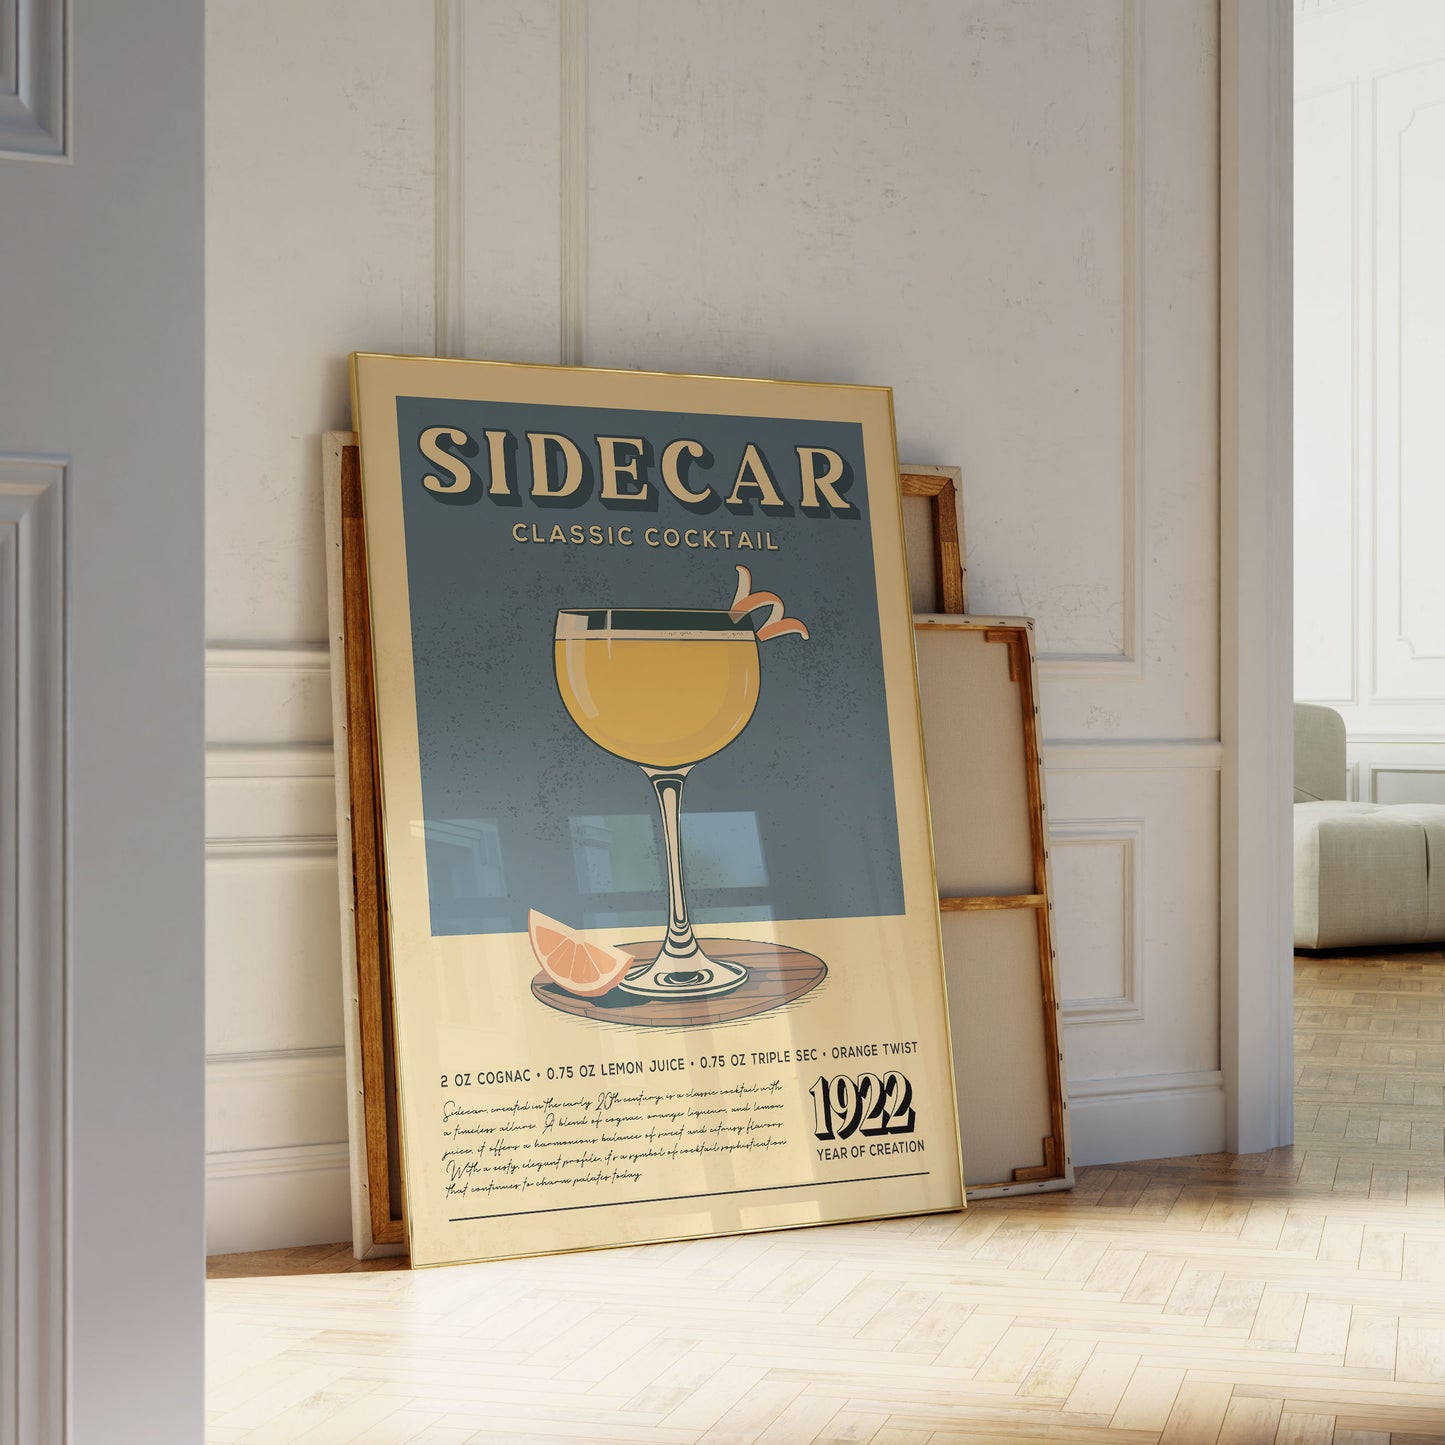 Sidecar - Classic Cocktail Poster